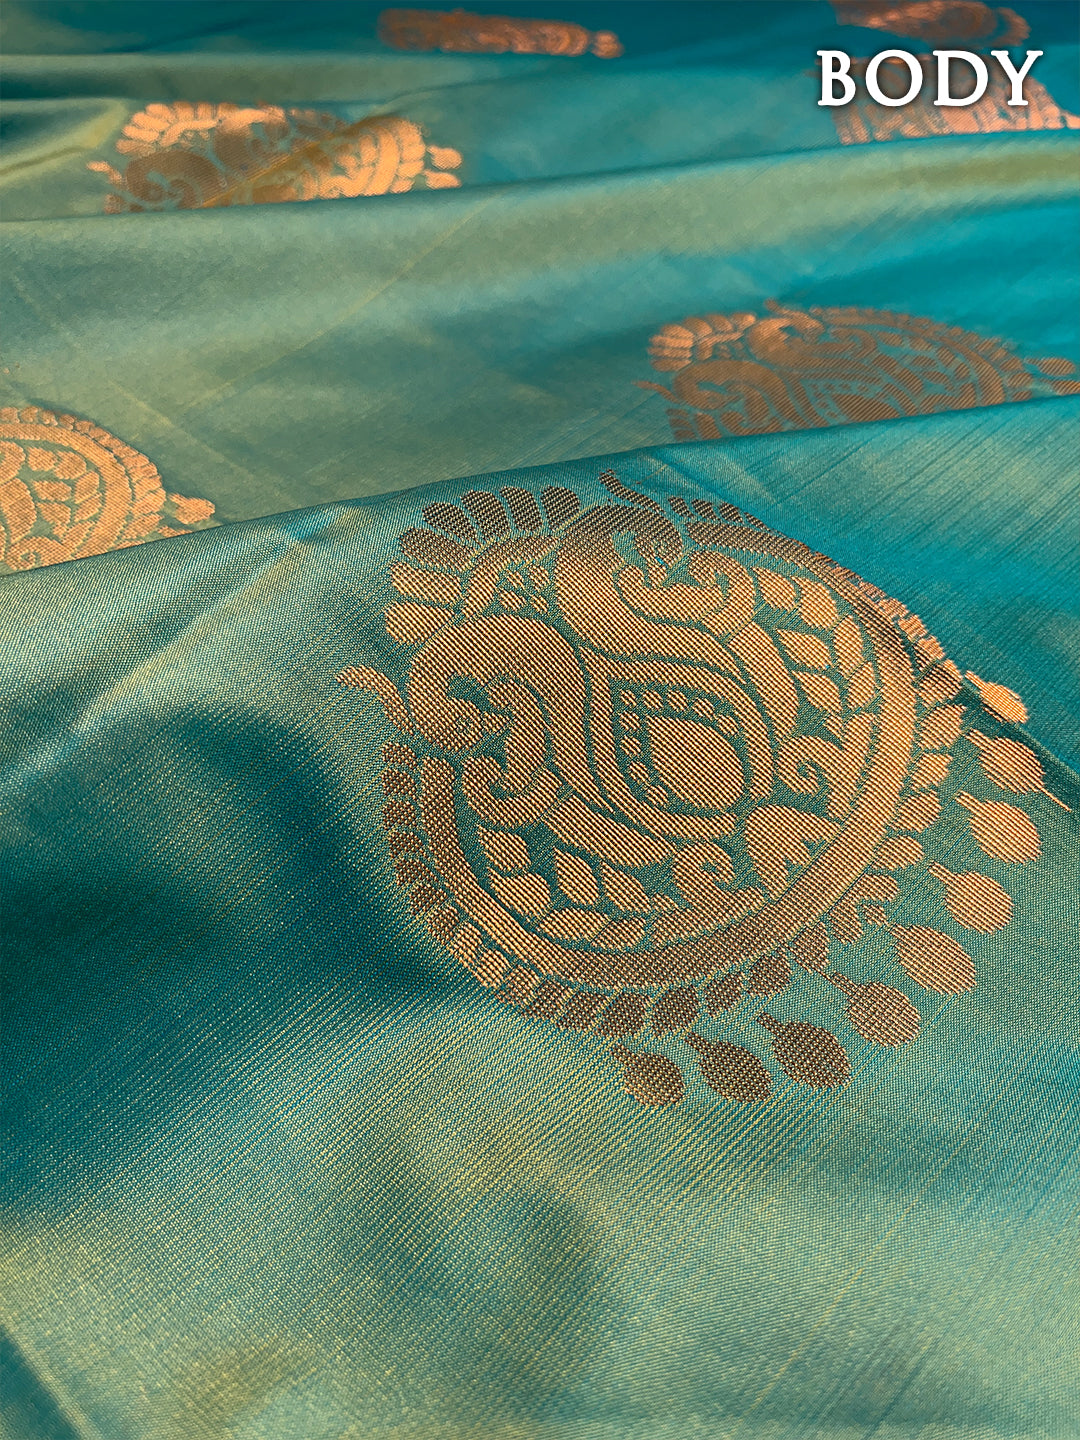 Dual color of turquoise green and maroon kanchipuram semi soft silk saree